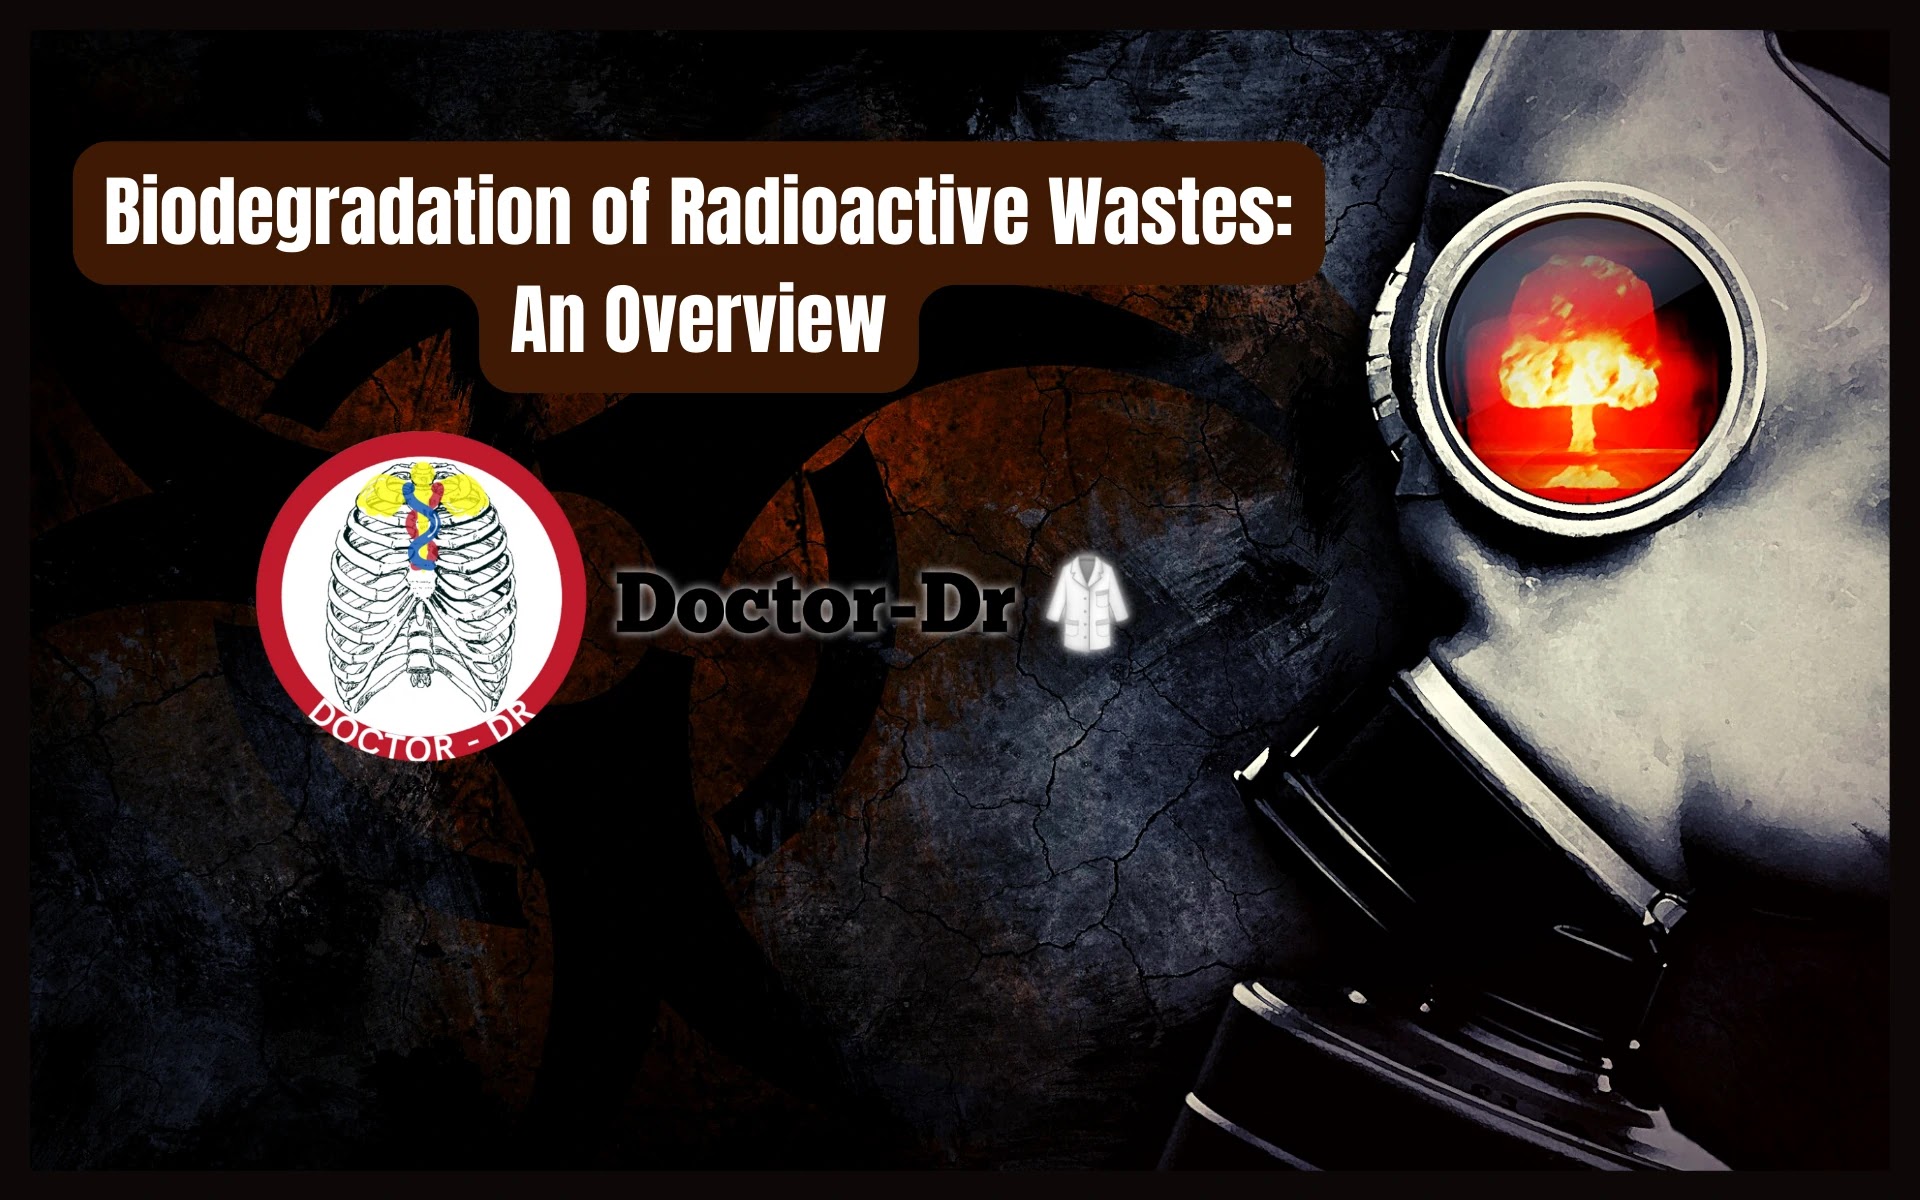 Biodegradation of Radioactive Wastes: An Overview